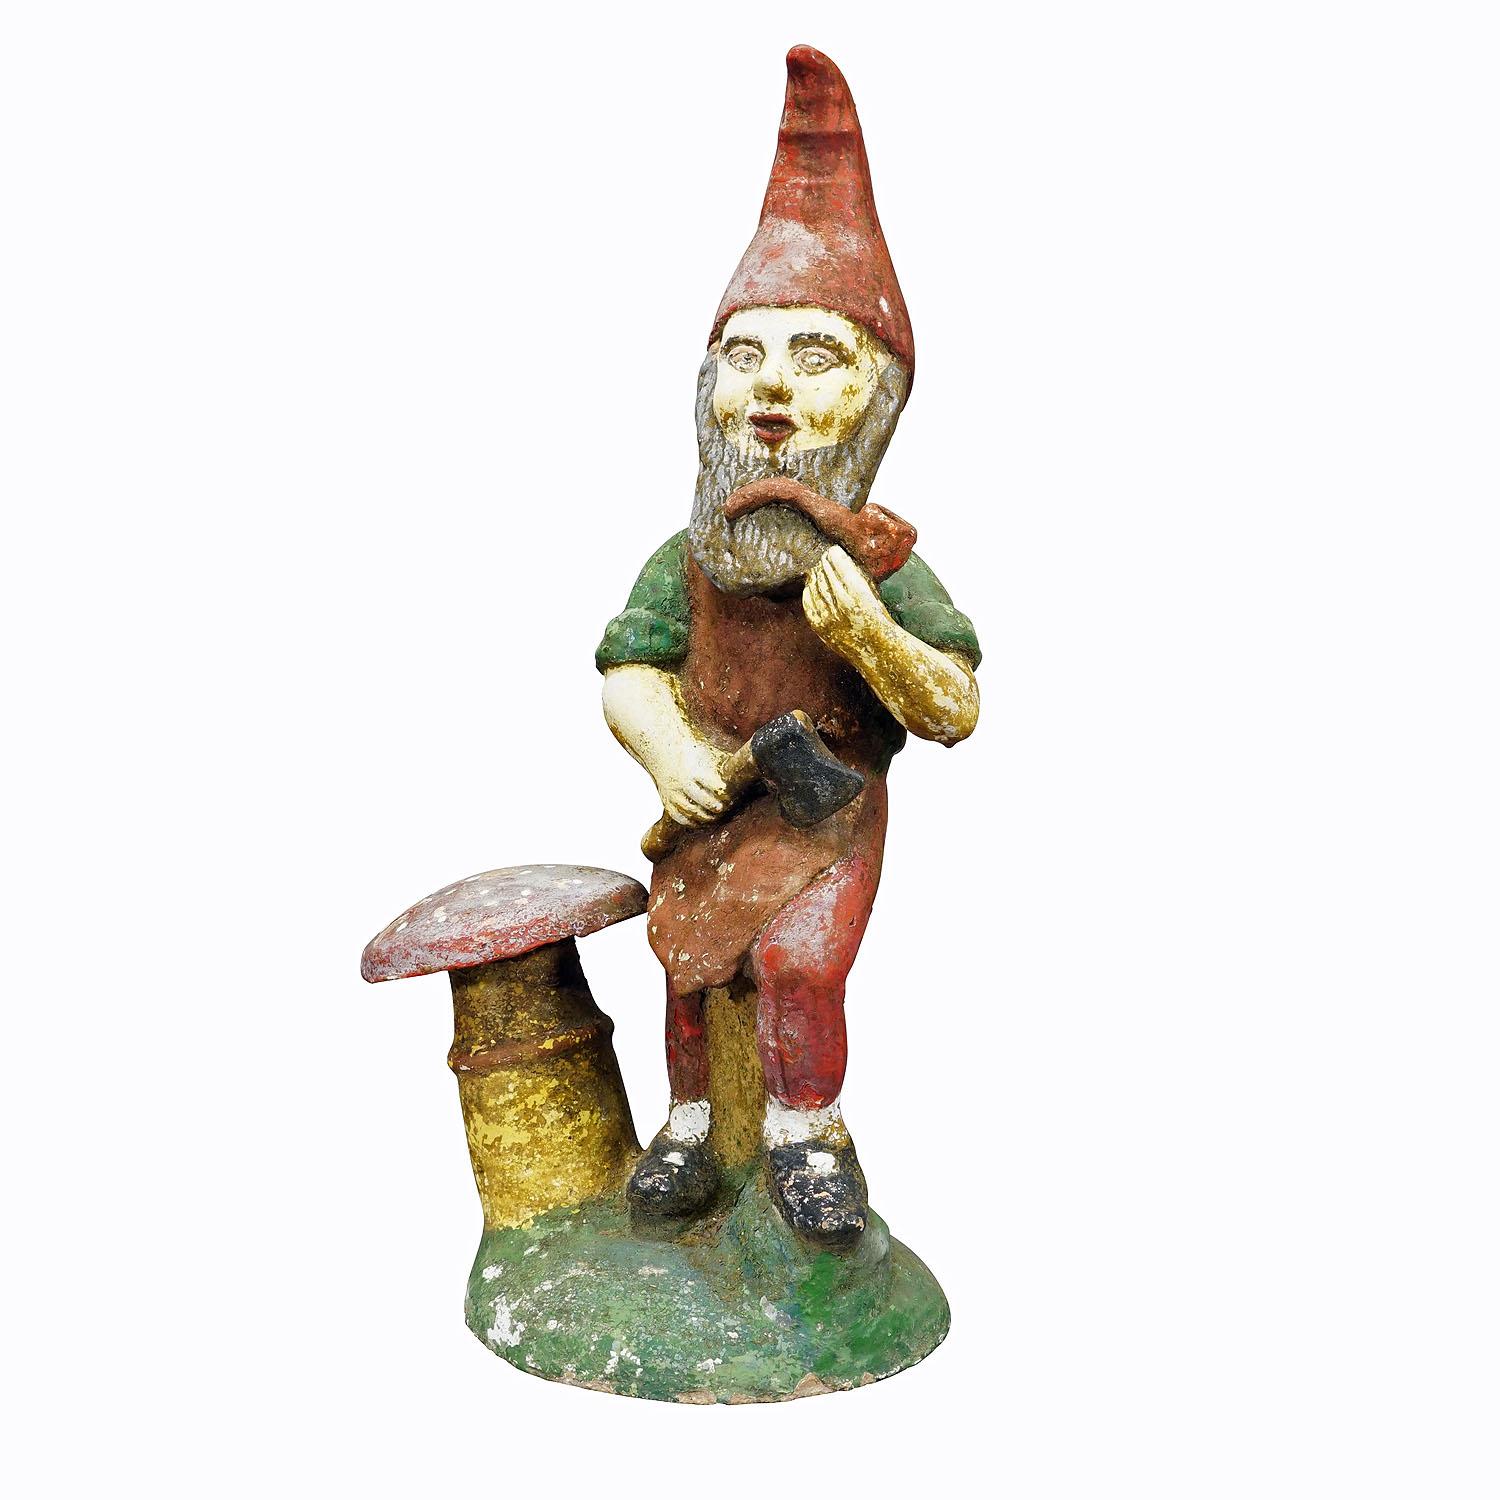 Large Terracotta Garden Gnome with Toadstool, Germany ca. 1920s

A large garden gnome from Germany, ca. 1920s. The gnome has a pipe and an axe in his hands and is standing next to a toadstool. Good used vintage condition with signs of wear